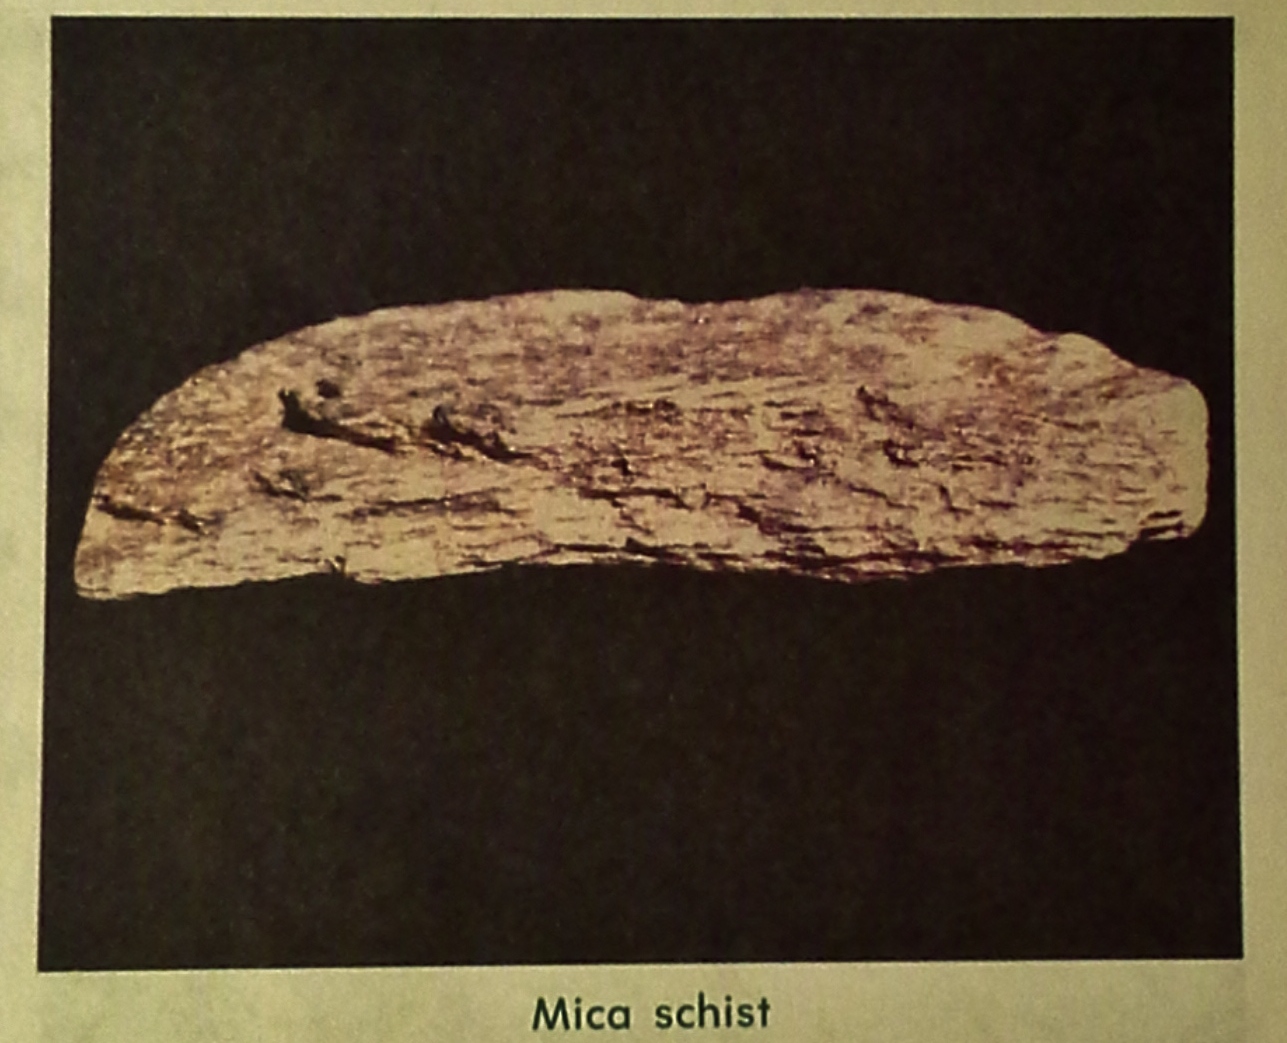 Image shows a brownish-golden chunk of mica schist from the ACE PACE 1086. Caption says, Mica Schist.